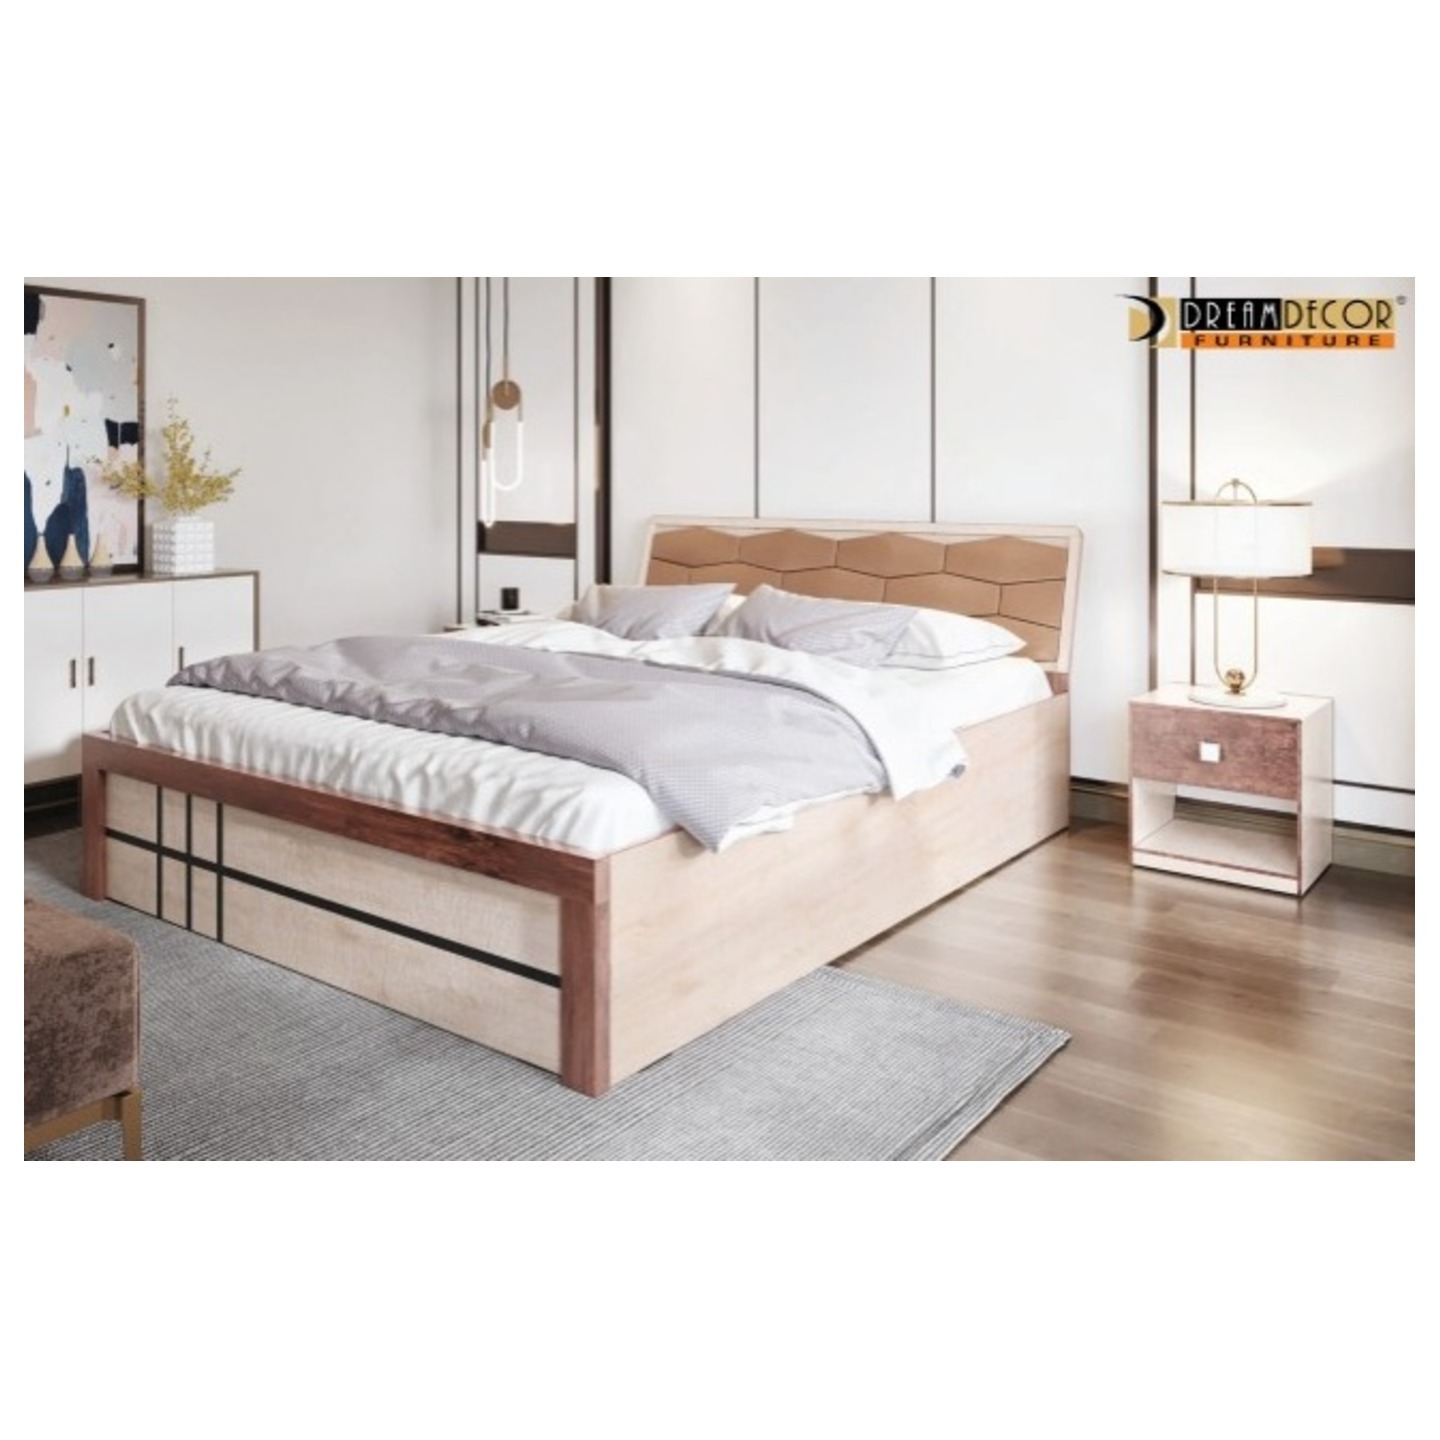 DDF  King Size Bed Premium Classic In Brown Colour